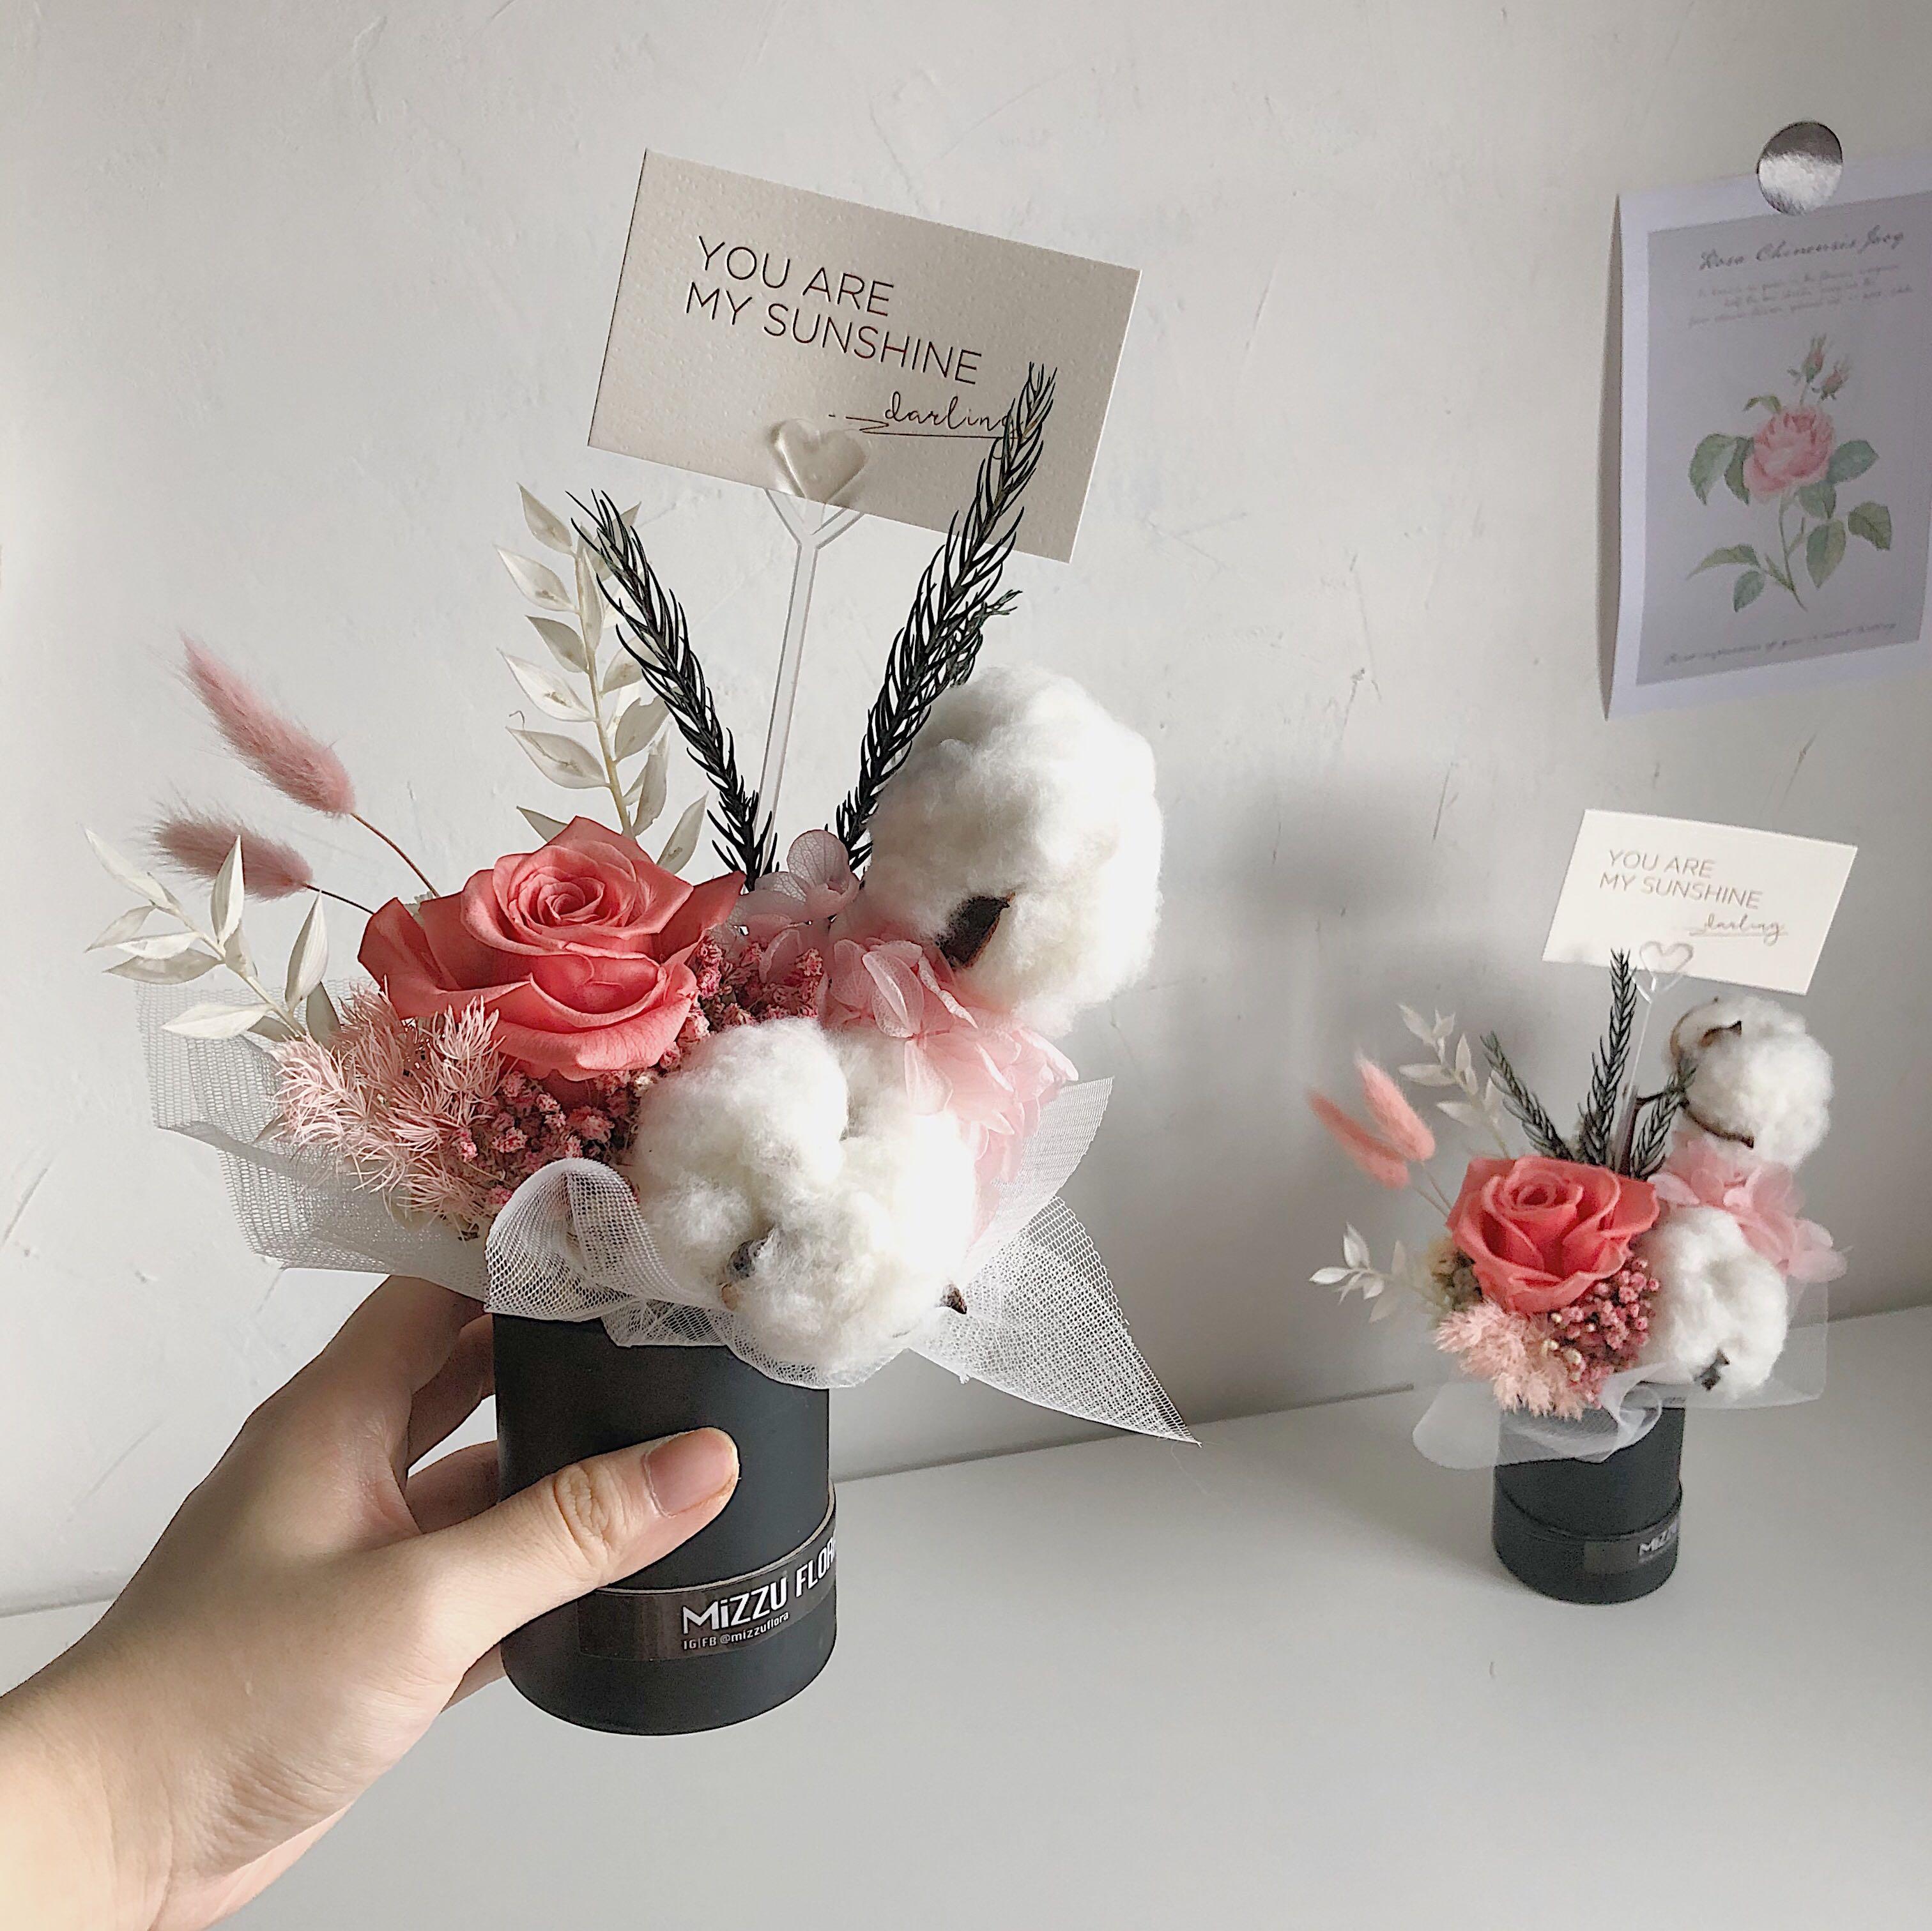 Free Delivery Preserved Dried Flower Box Cute Table Decor Anniversary Gift Birthday Surprise Office Table Display Flower Arrangement 干花花桶 Gardening Flowers Bouquets On Carousell